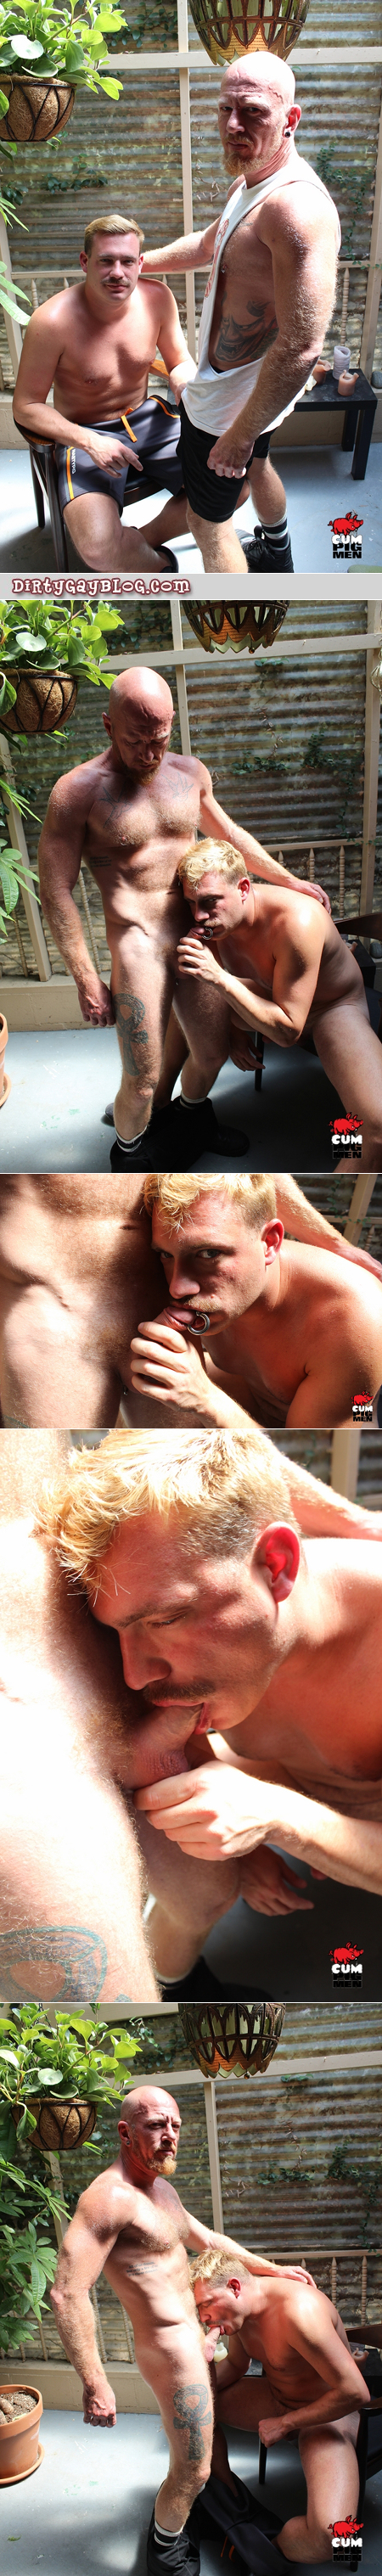 Mustachioed blonde man sucks the pierced cock of a hairy ginger Daddy.